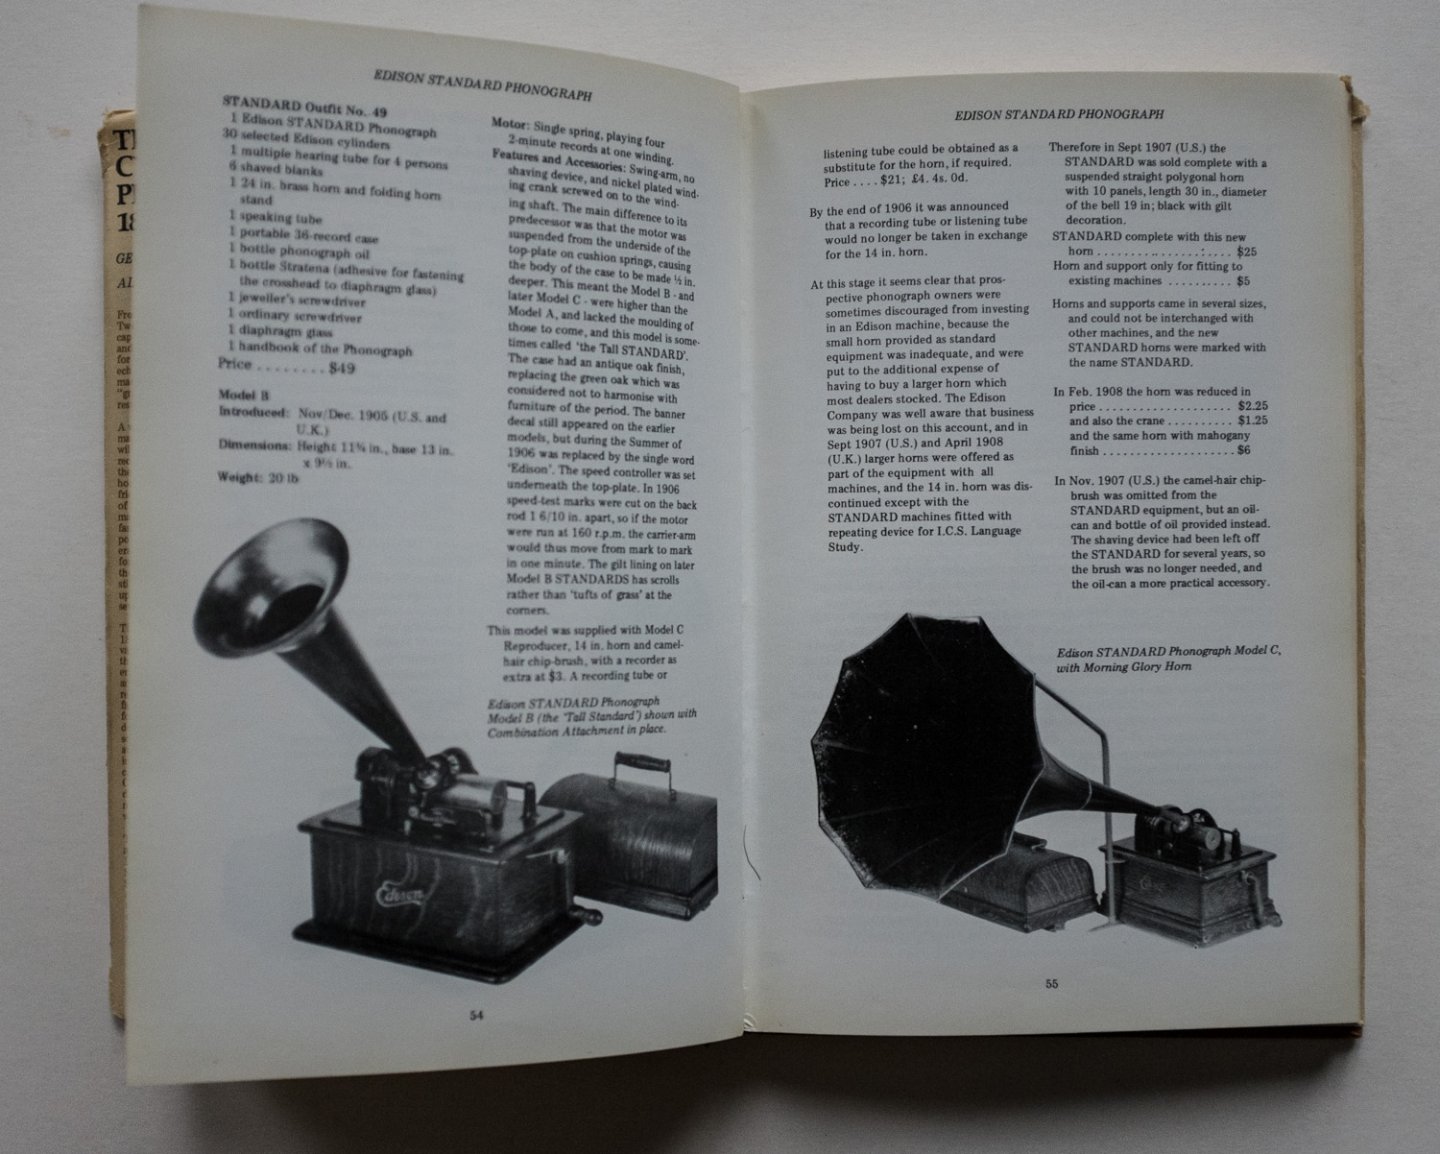 Frow. George L. and Albert F. Sefl - The Edison cylinder phonographs 1877-1929 - a detailed account of the entertainment models until 1929